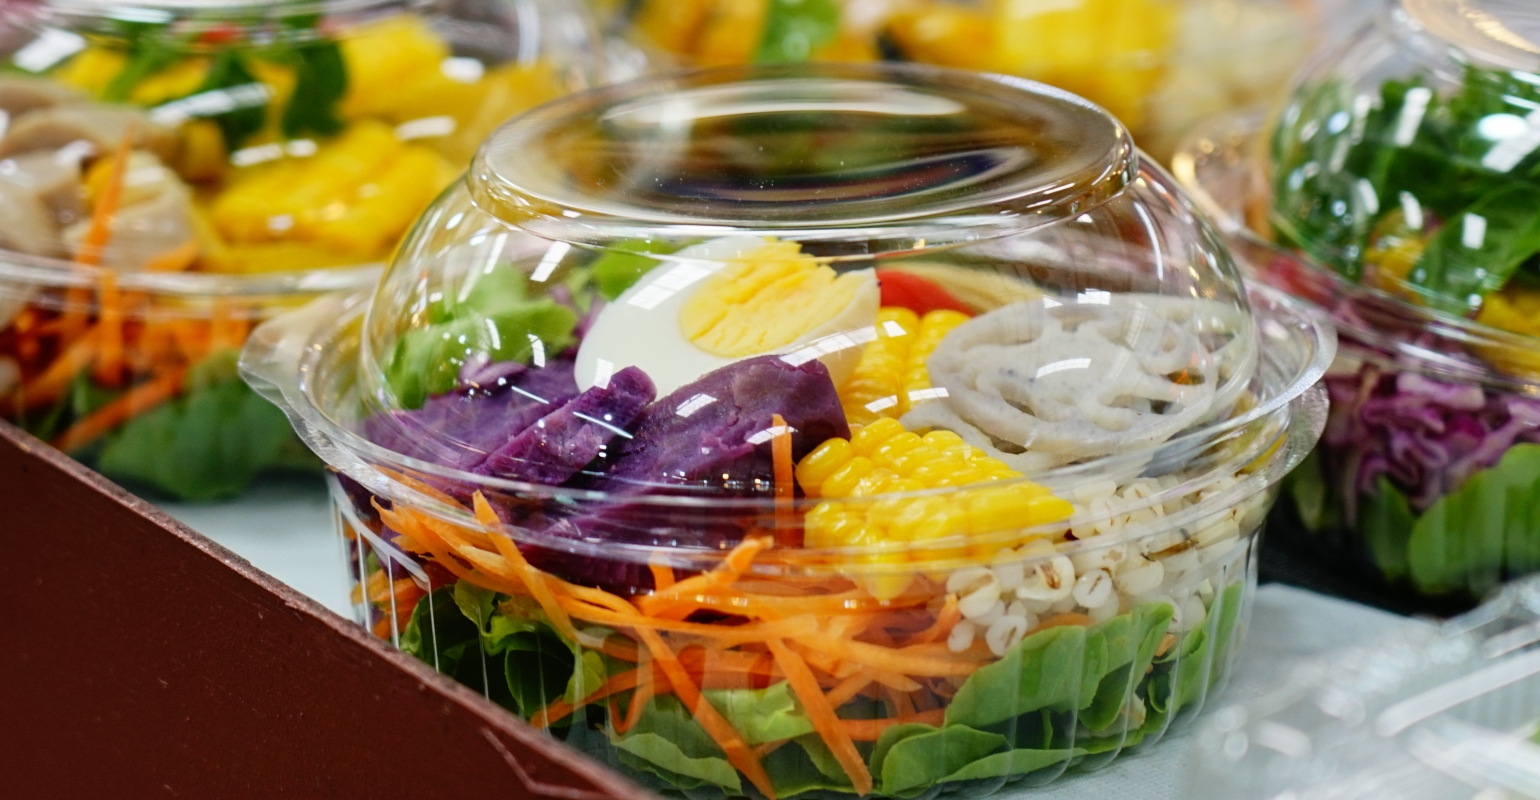 Freshness Preserved: The Science Behind Ready-to-Eat Meal Packaging